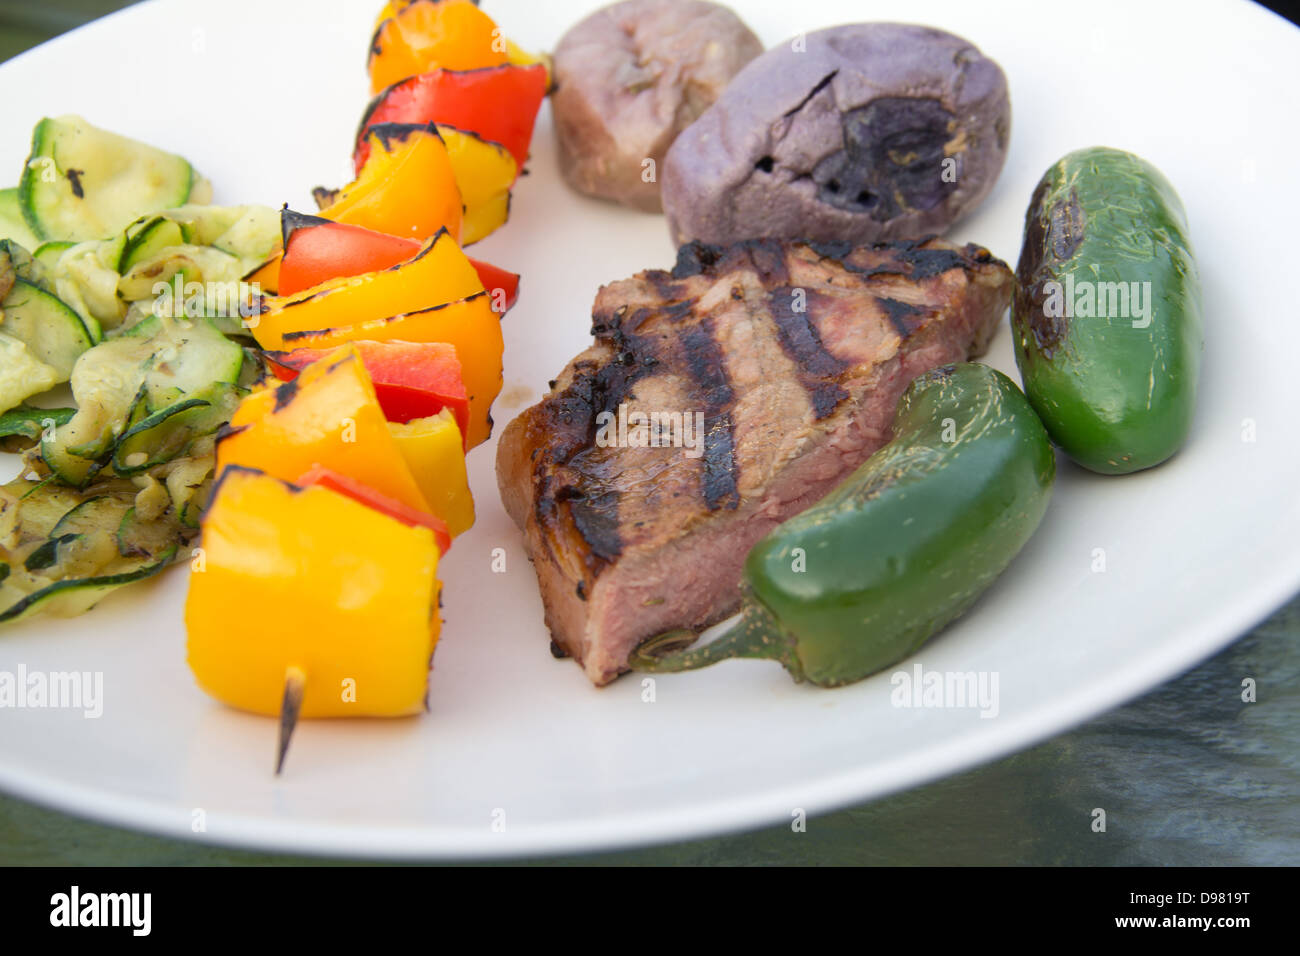 Kabob and steak with vegetables Stock Photo